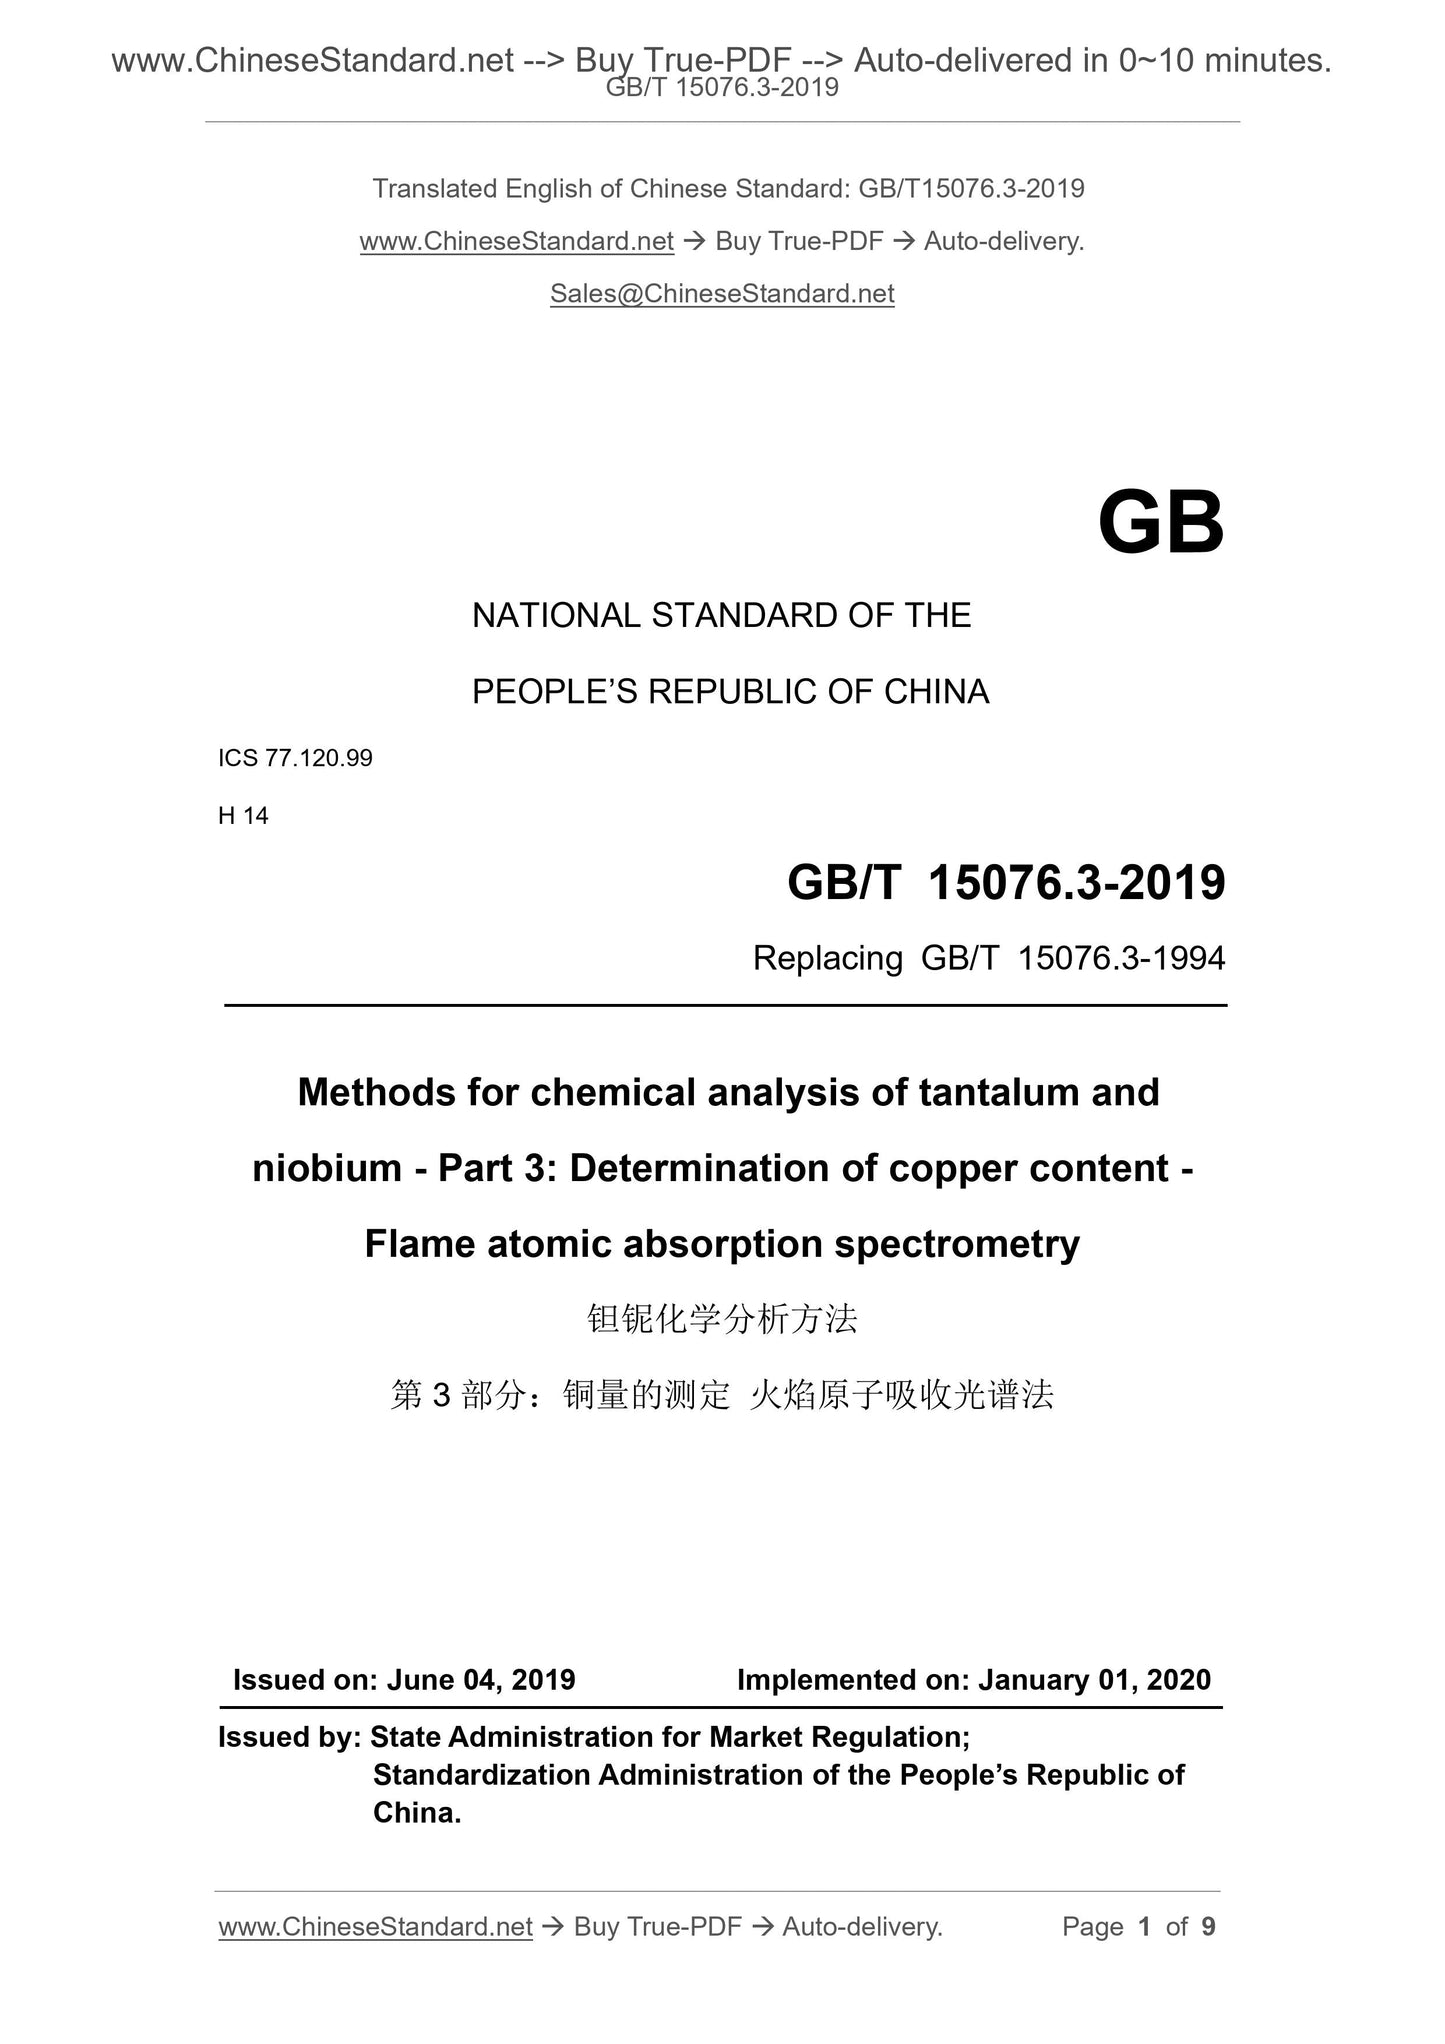 GB/T 15076.3-2019 Page 1